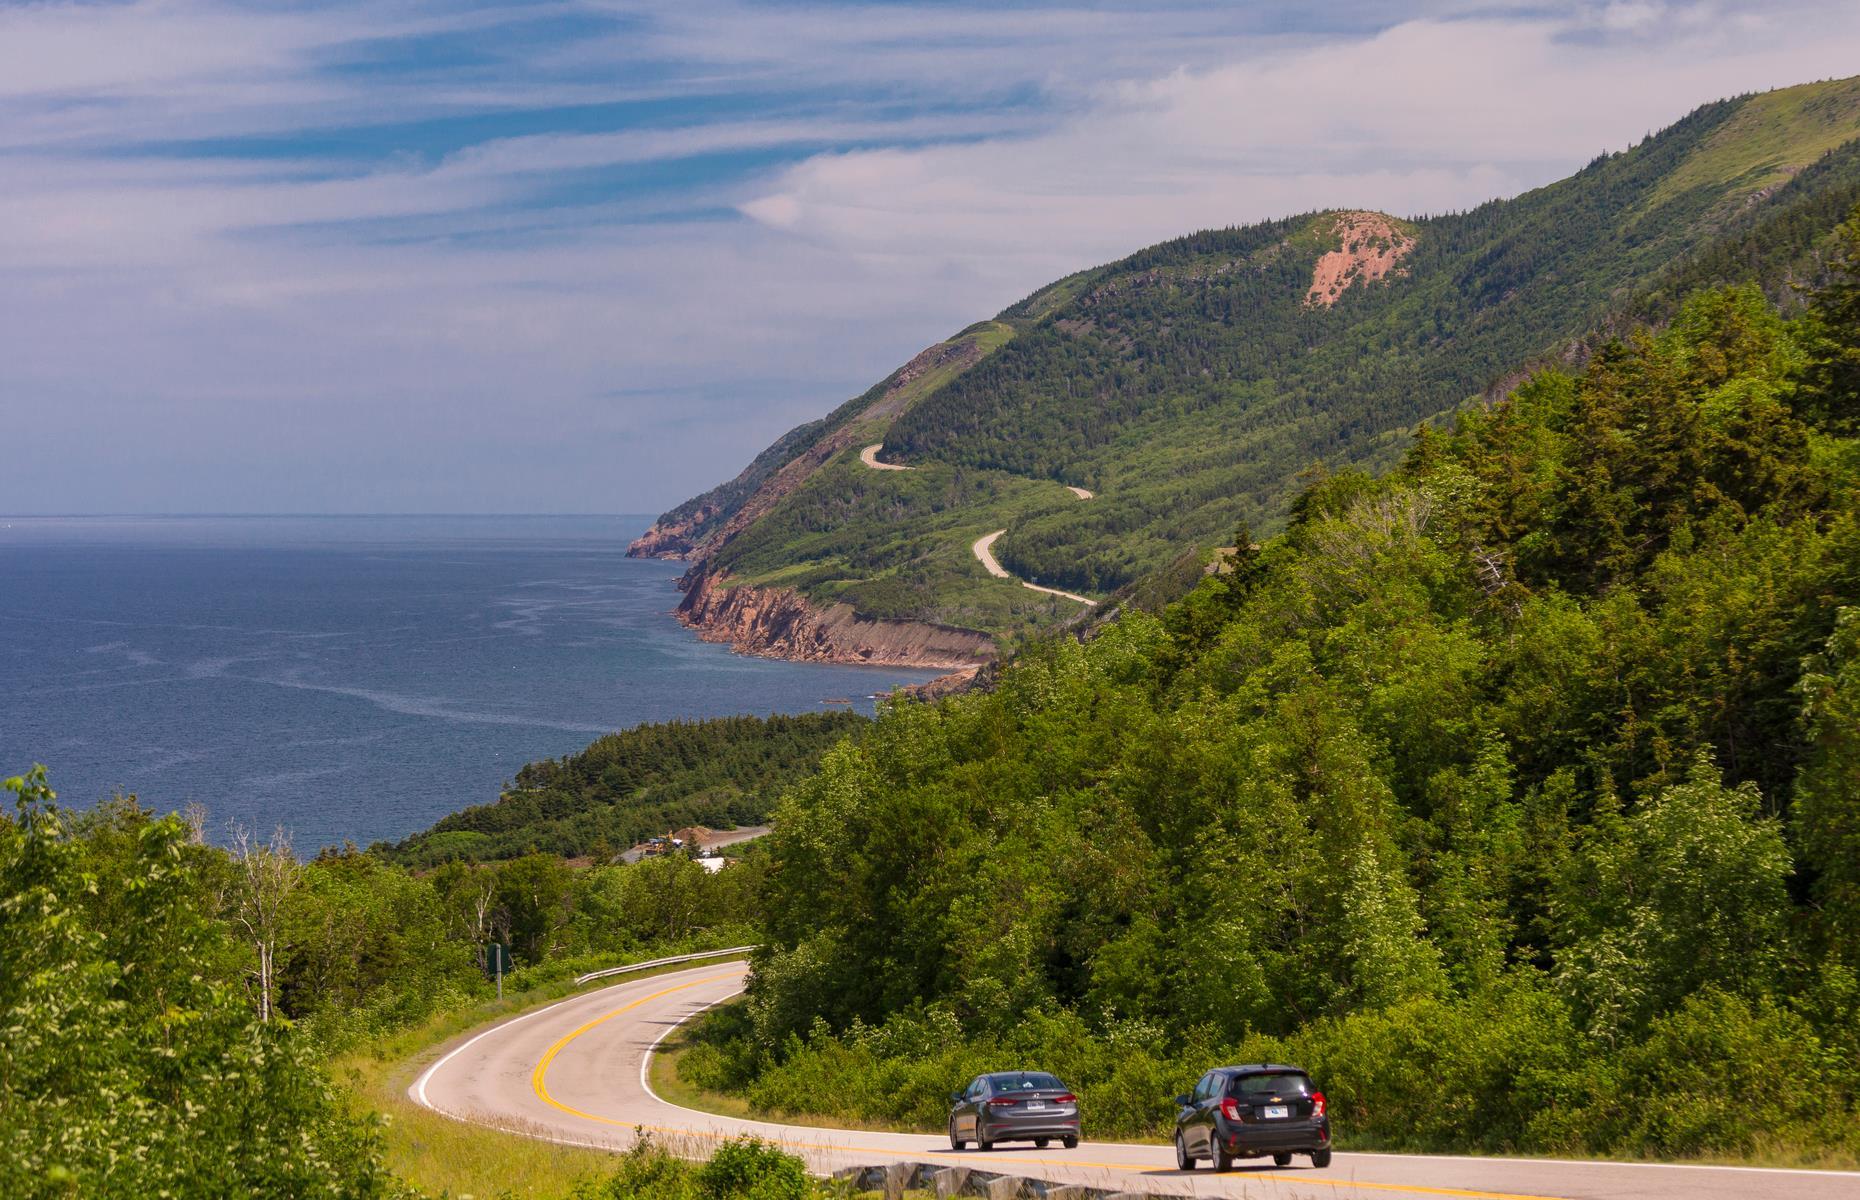 <p>Looping around Cape Breton Island in Nova Scotia, this famous 185-mile (298km) route delivers dramatic coastal and highland scenery and all-round thrilling driving terrain. Start at Baddeck and go east or west to see the island's natural beauty flit by your window. Highlights include Cape Breton Highlands National Park and Pleasant Bay, a top whale watching spot. These <a href="https://www.loveexploring.com/galleries/78646/50-photos-that-will-make-you-fall-in-love-with-canada?page=1">50 photos are sure to make you fall in love with Canada</a>.</p>